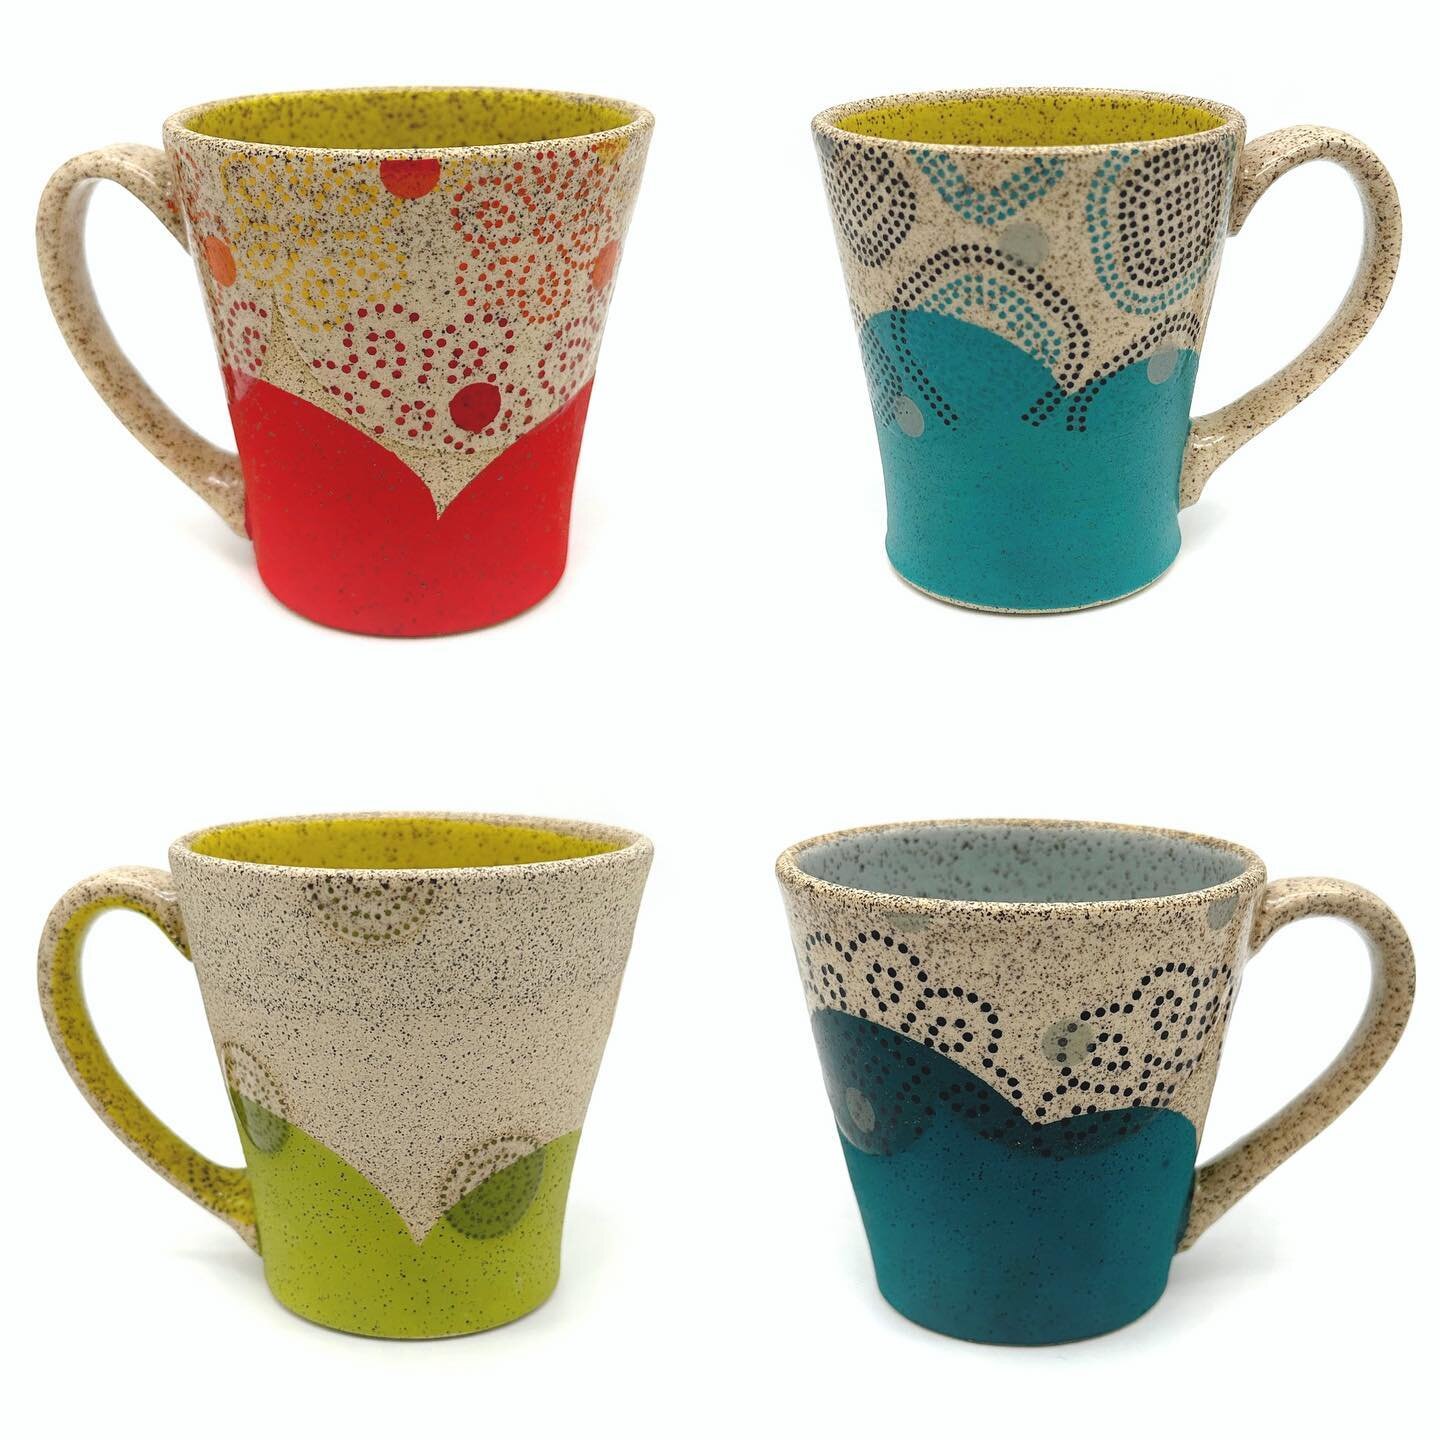 Today at 10am central the @kcurbanpotters online shop will go live! I have a handful of mugs available (some are pictured here 😊) along with KC Urban Potters members and invited artists&rsquo; work. Check it out on kcurbanpotters.com today! 

#handm